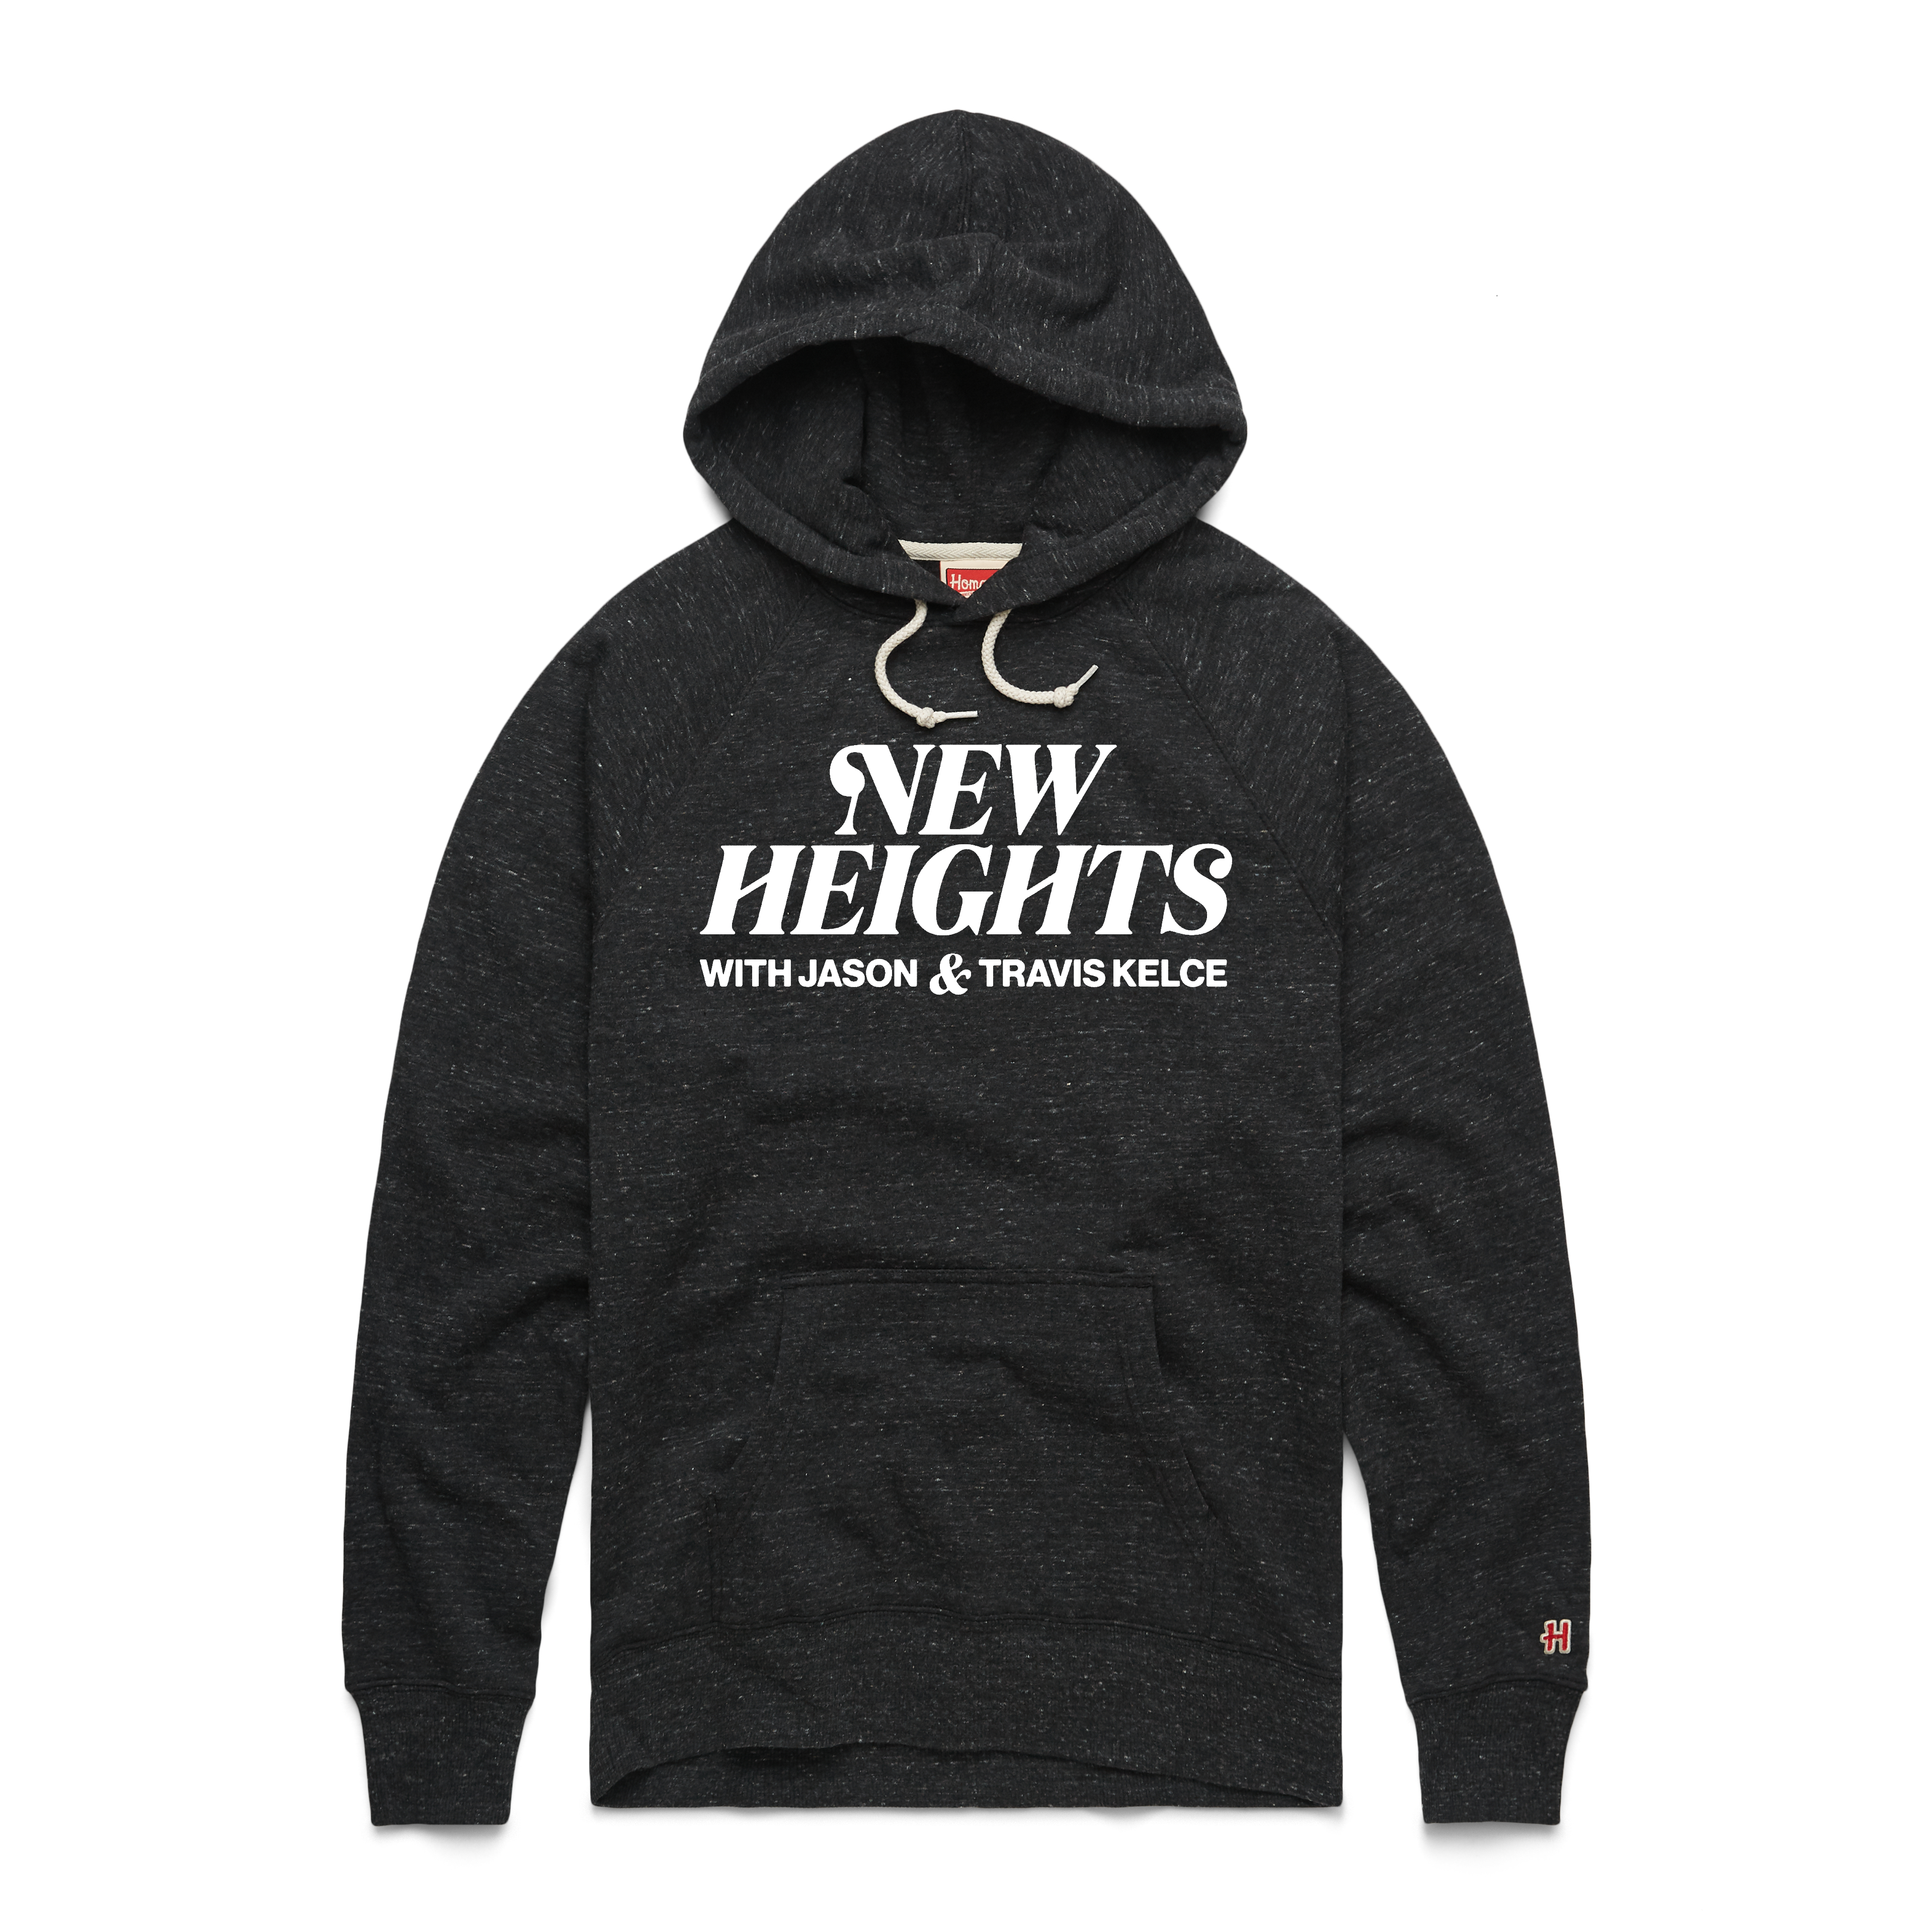 CORRECTING and REPLACING “New Heights” T-shirts and Hoodies